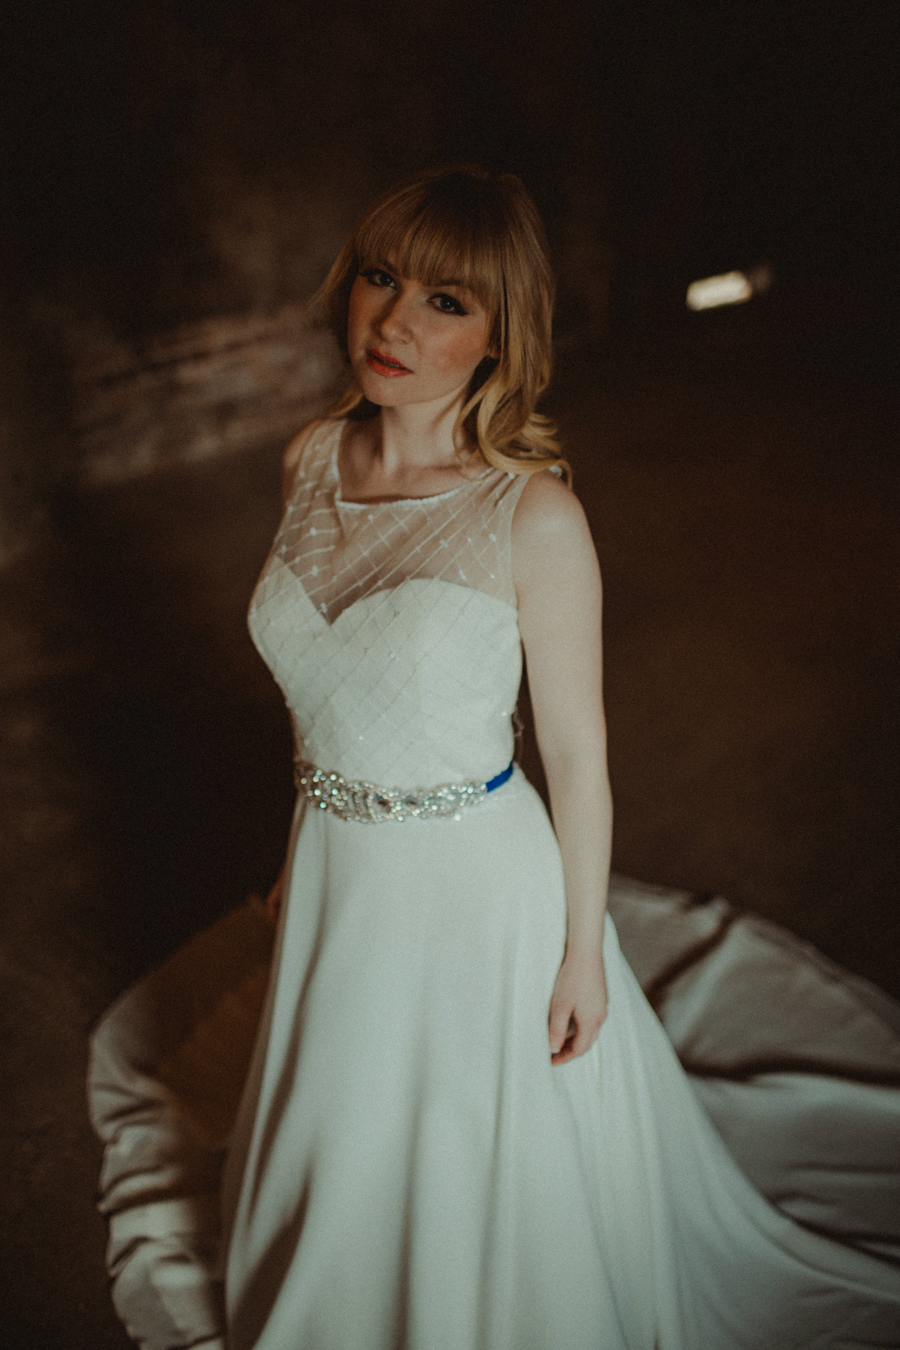 A Whimsical & Rustic, Alice in Wonderland Styled Bridal Shoot!